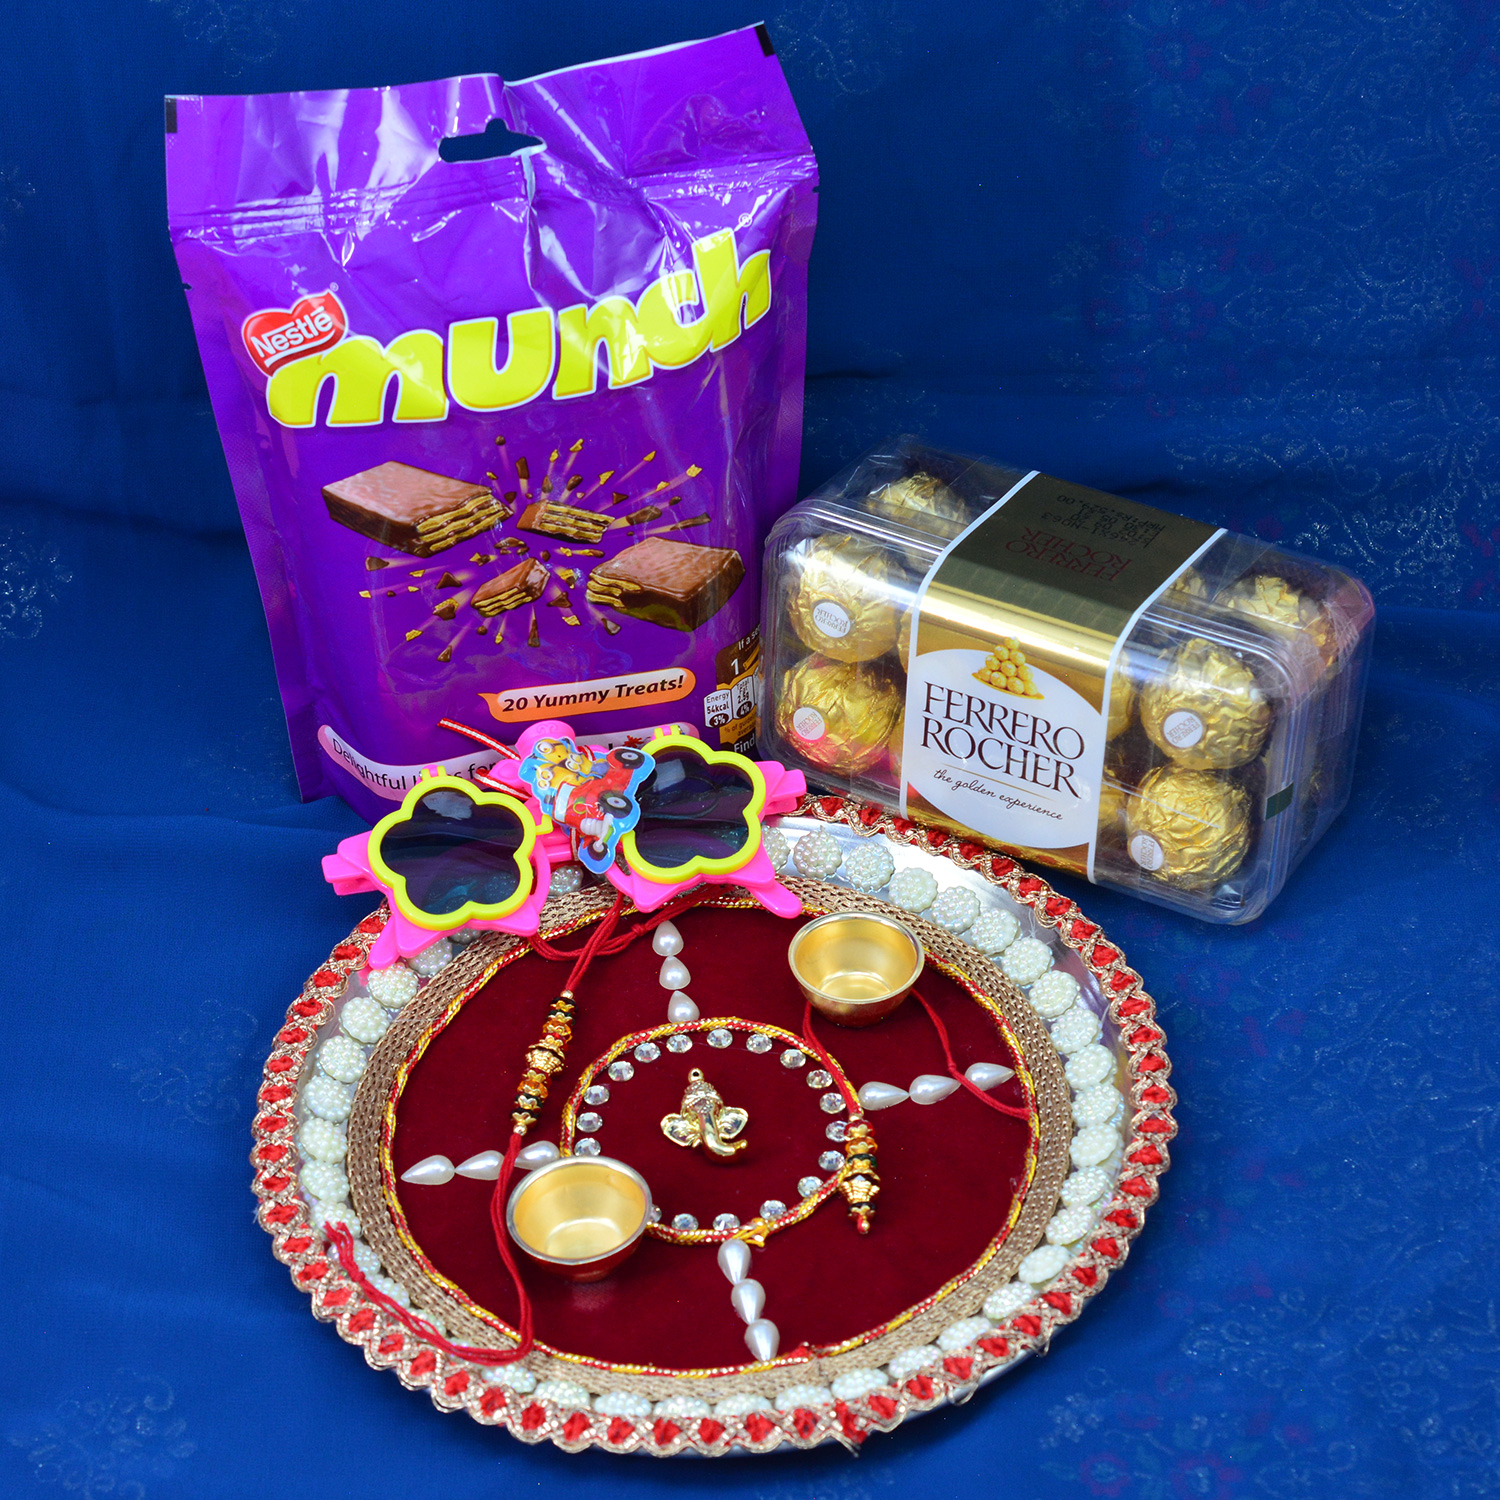 Pack of Munch Chocolates and Ferrero Rocher with Handcrafted Maroon Base Rakhi Puja Thali